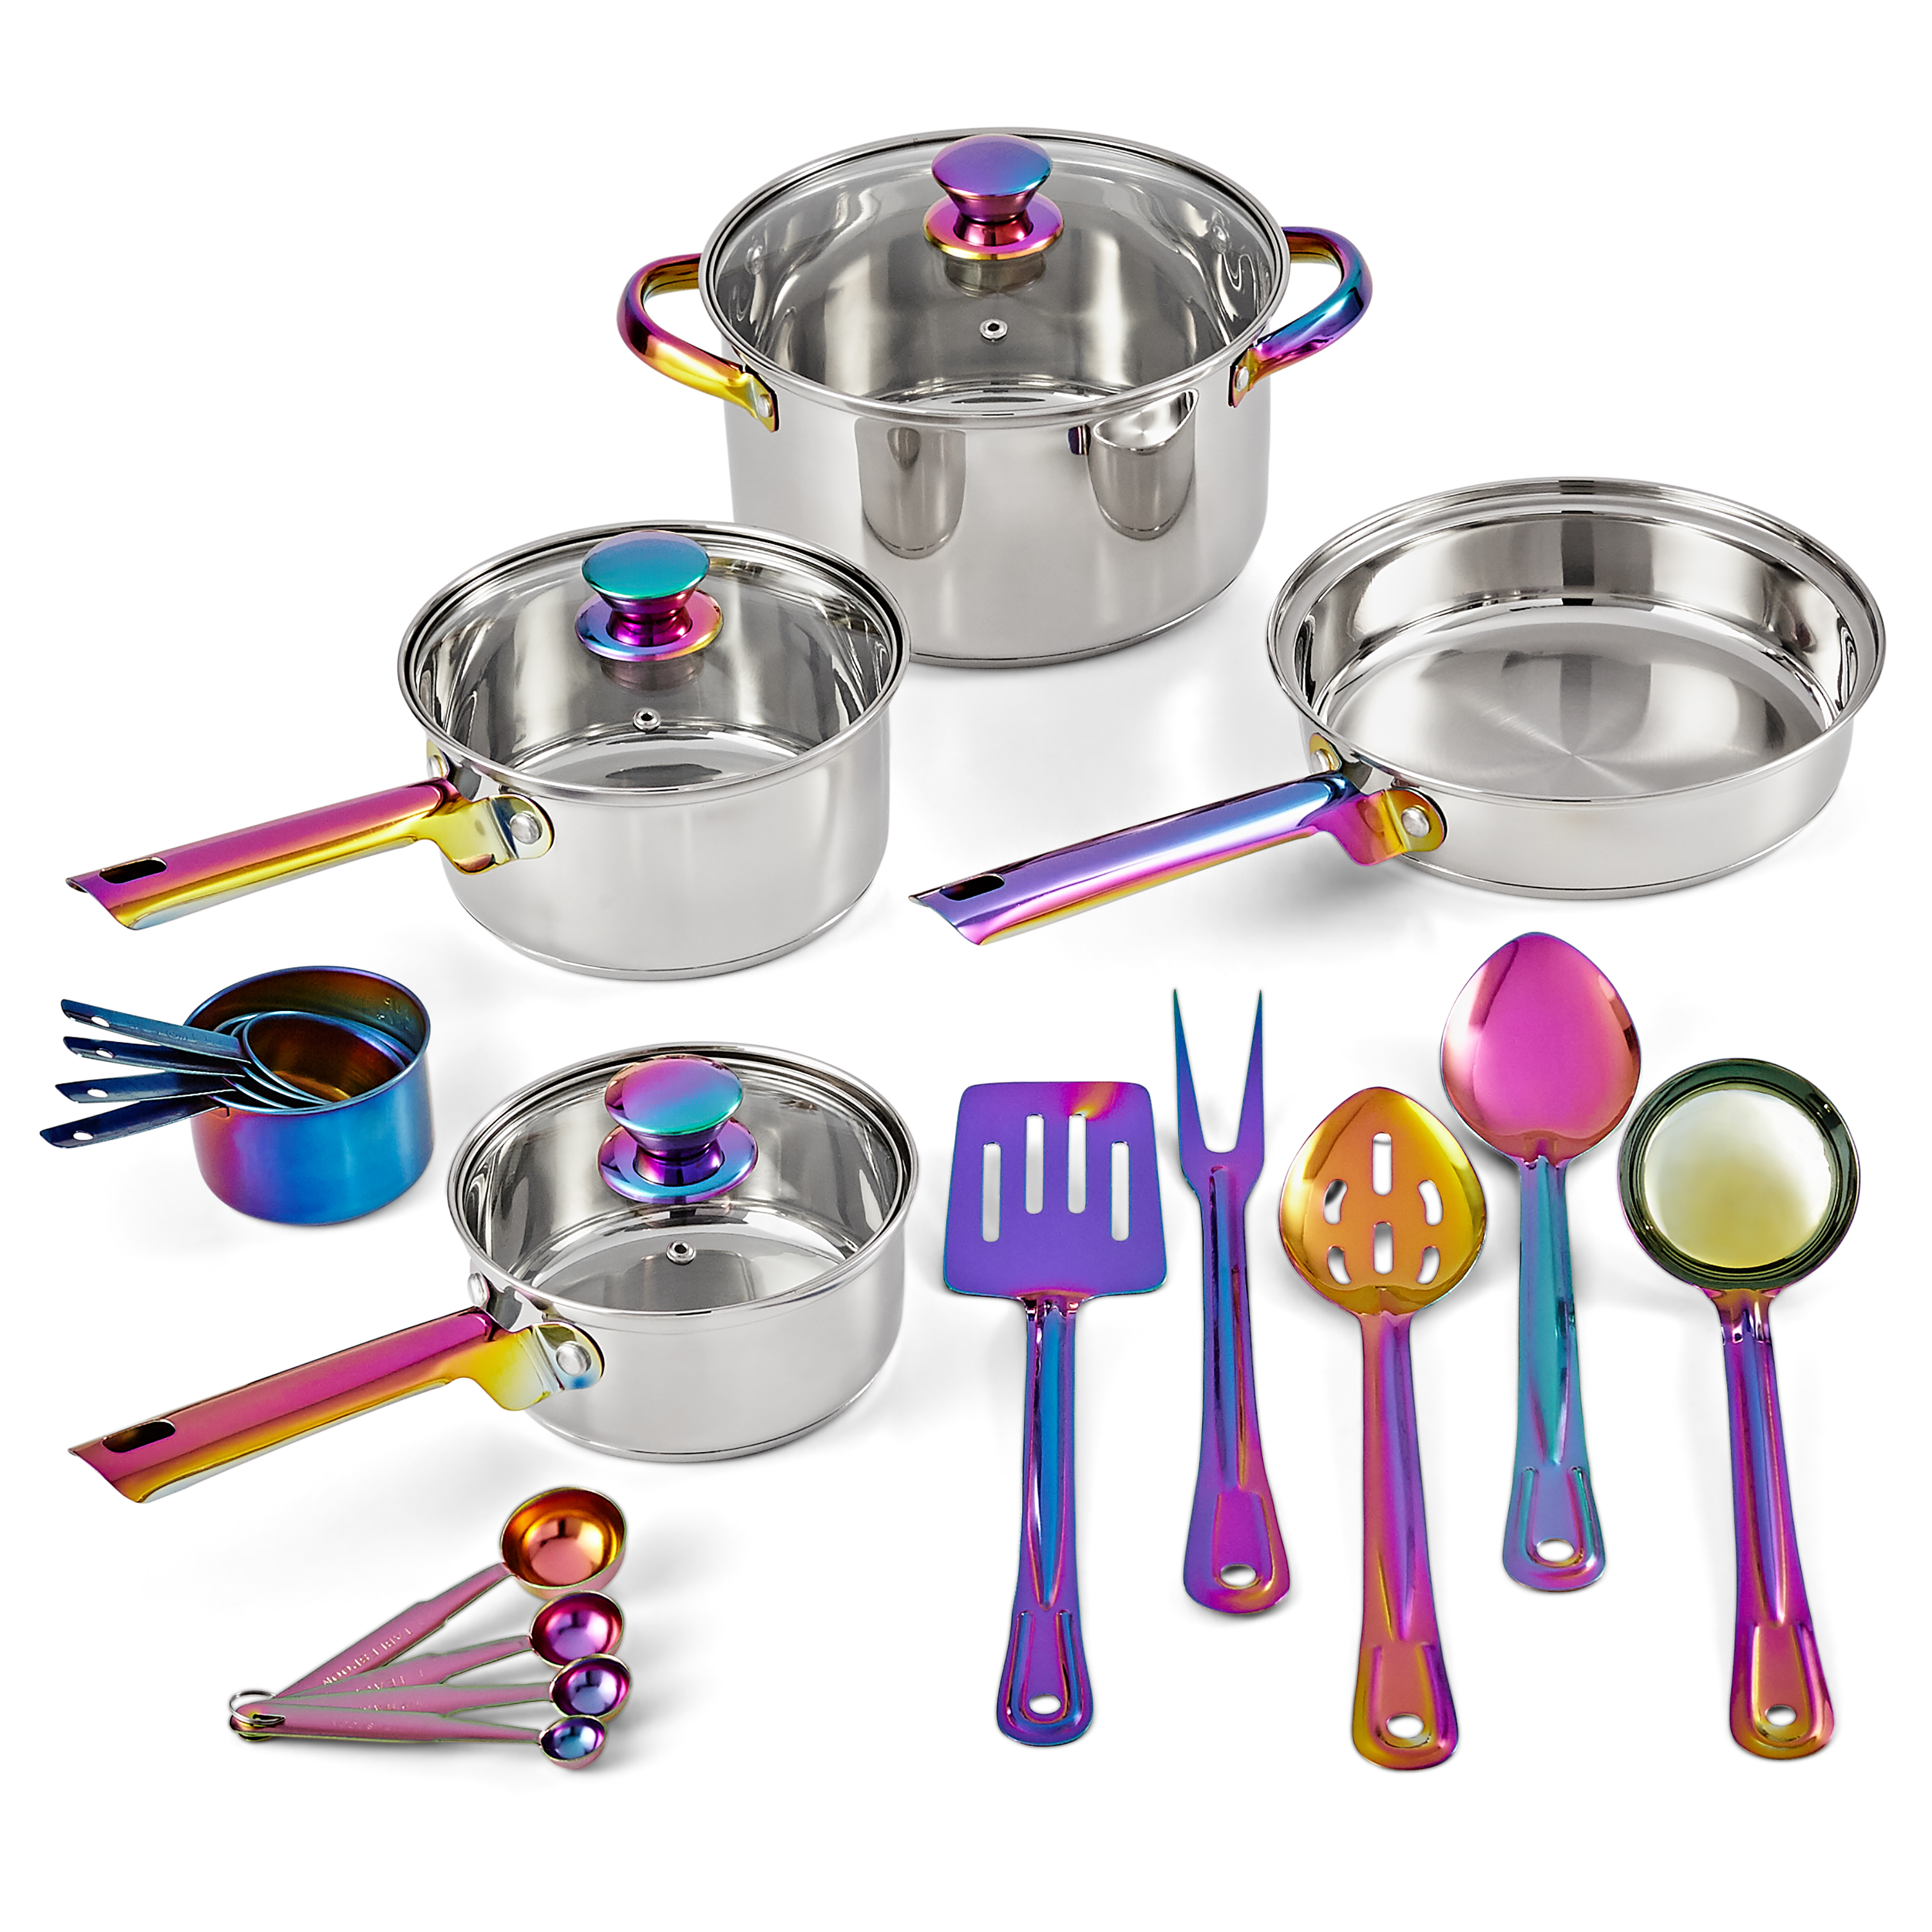 Mainstays Iridescent Stainless Steel 20-Piece Cookware Set, with Kitchen Utensils and Tools - image 1 of 9